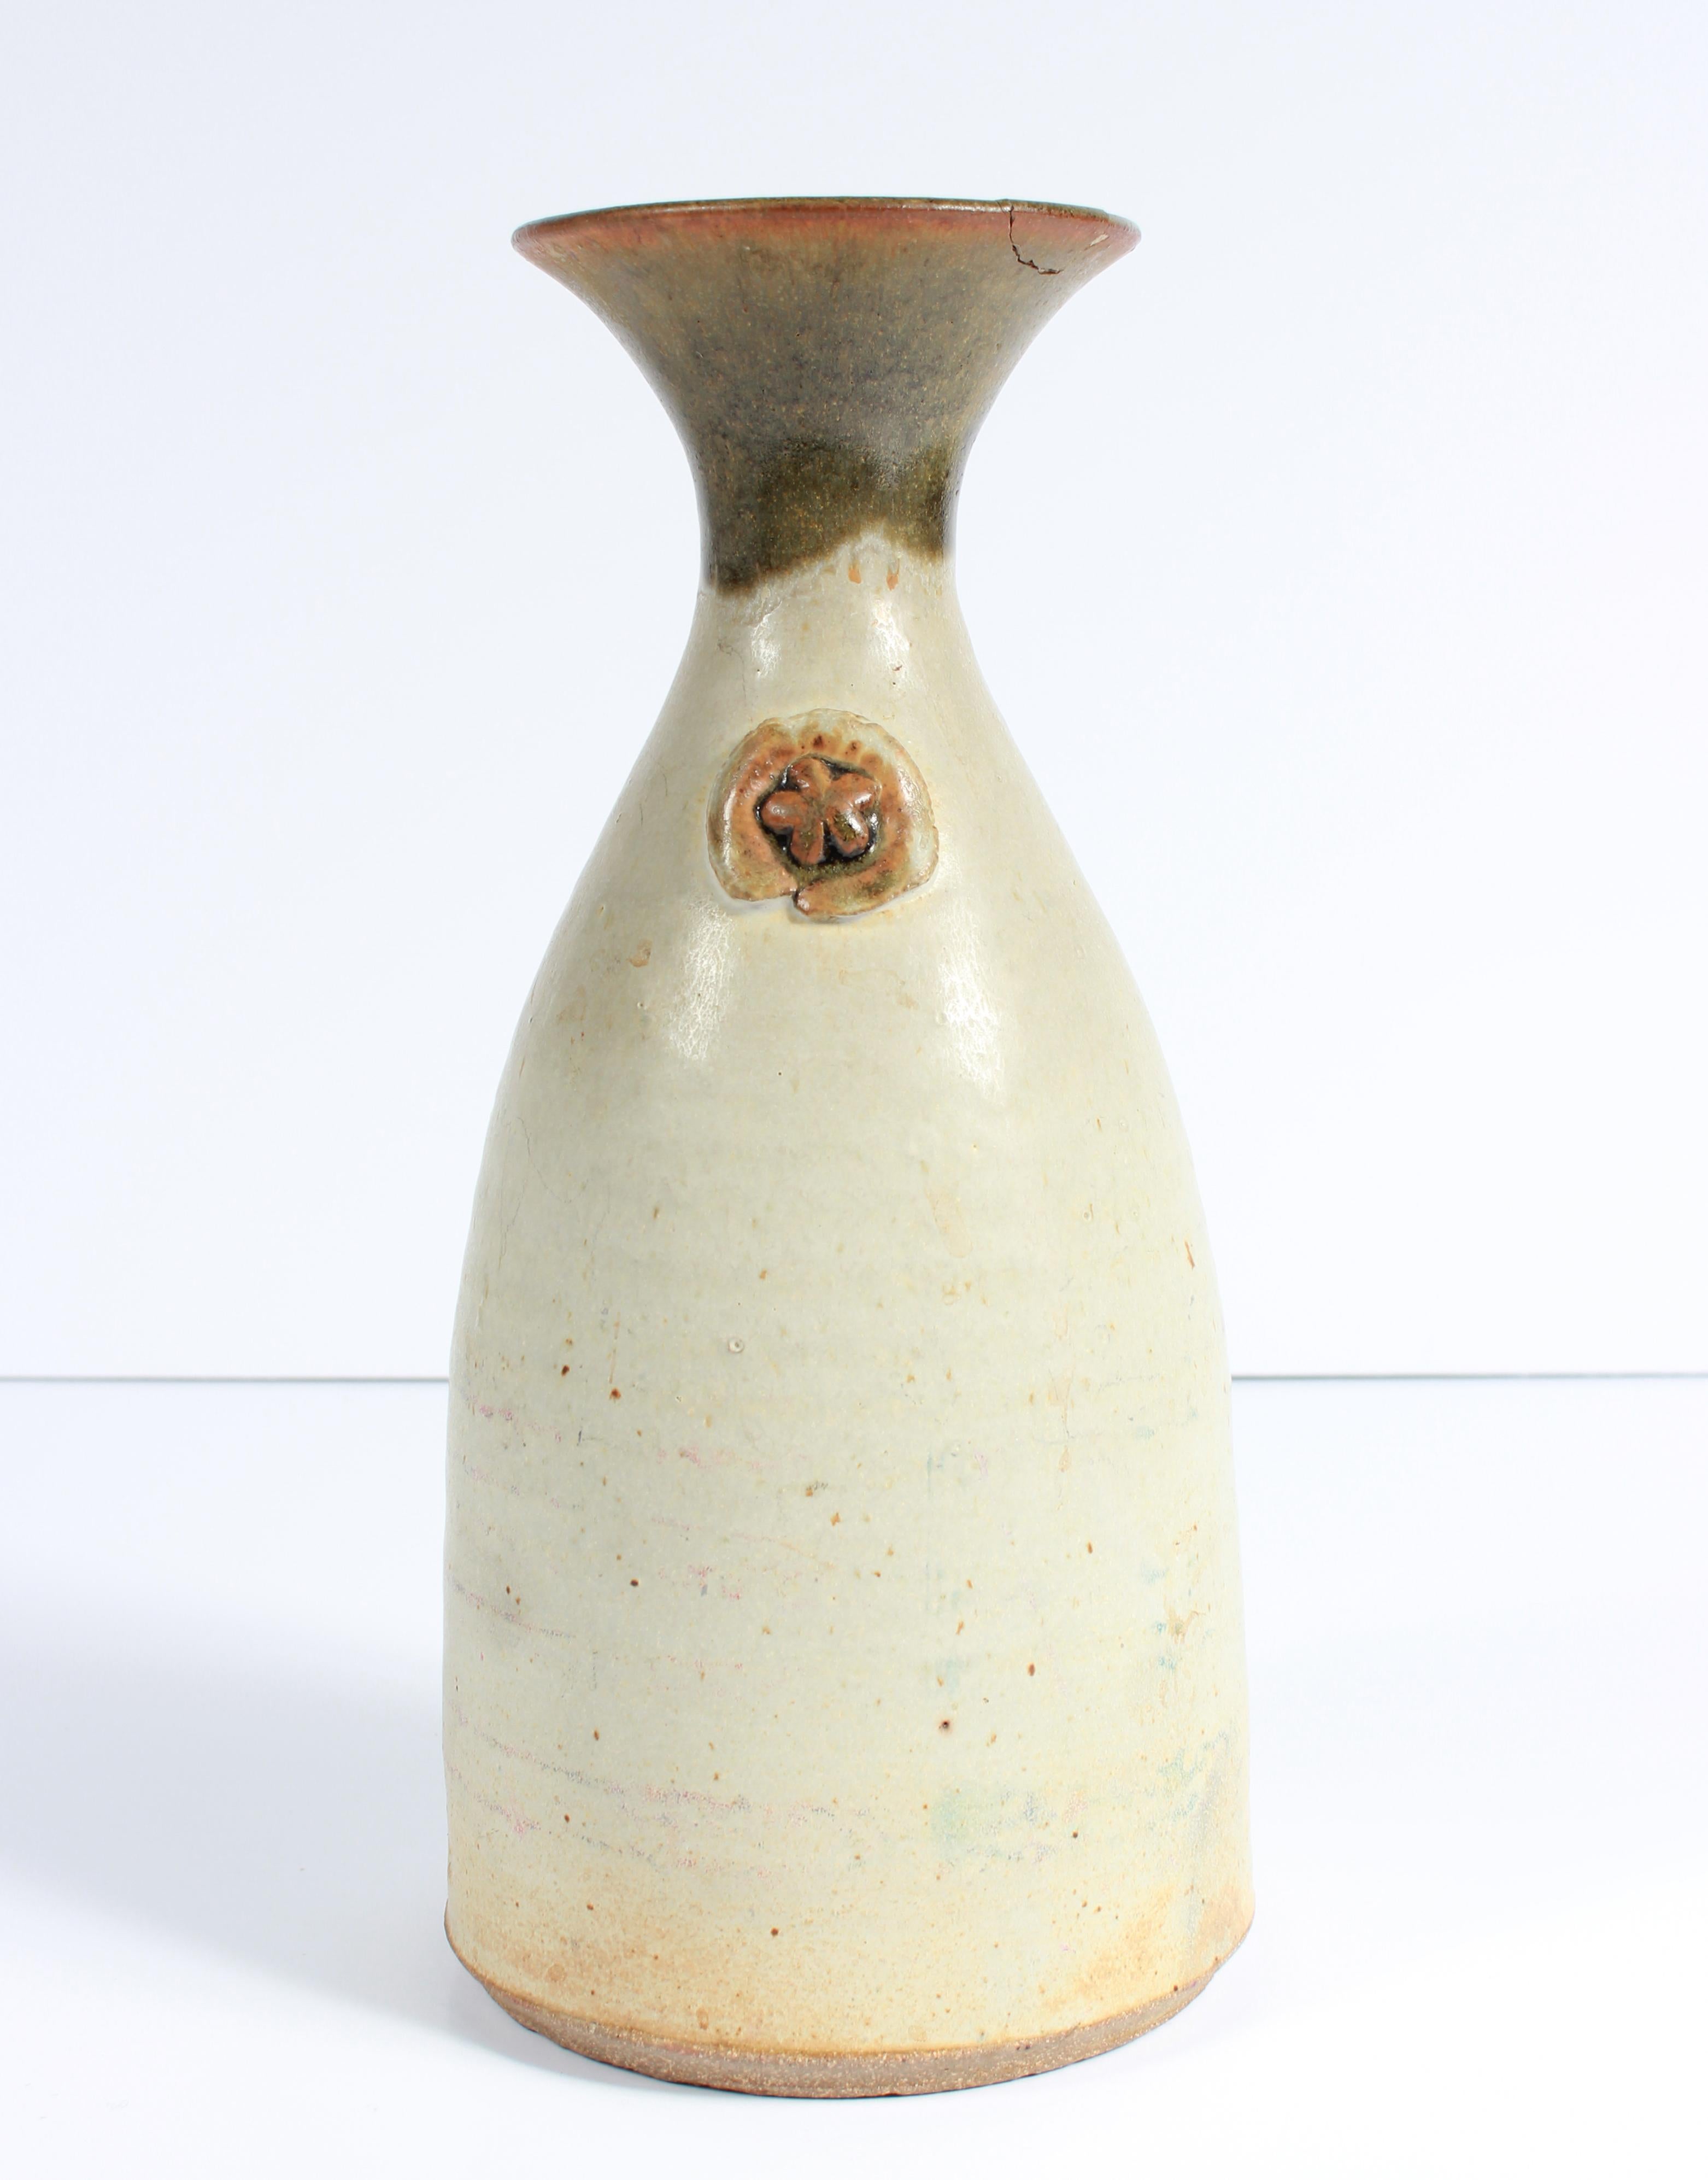 Unknown Abstract Sculpture - Cream-Colored Vase with Flower Detail 1973 Stone Ground Ceramic